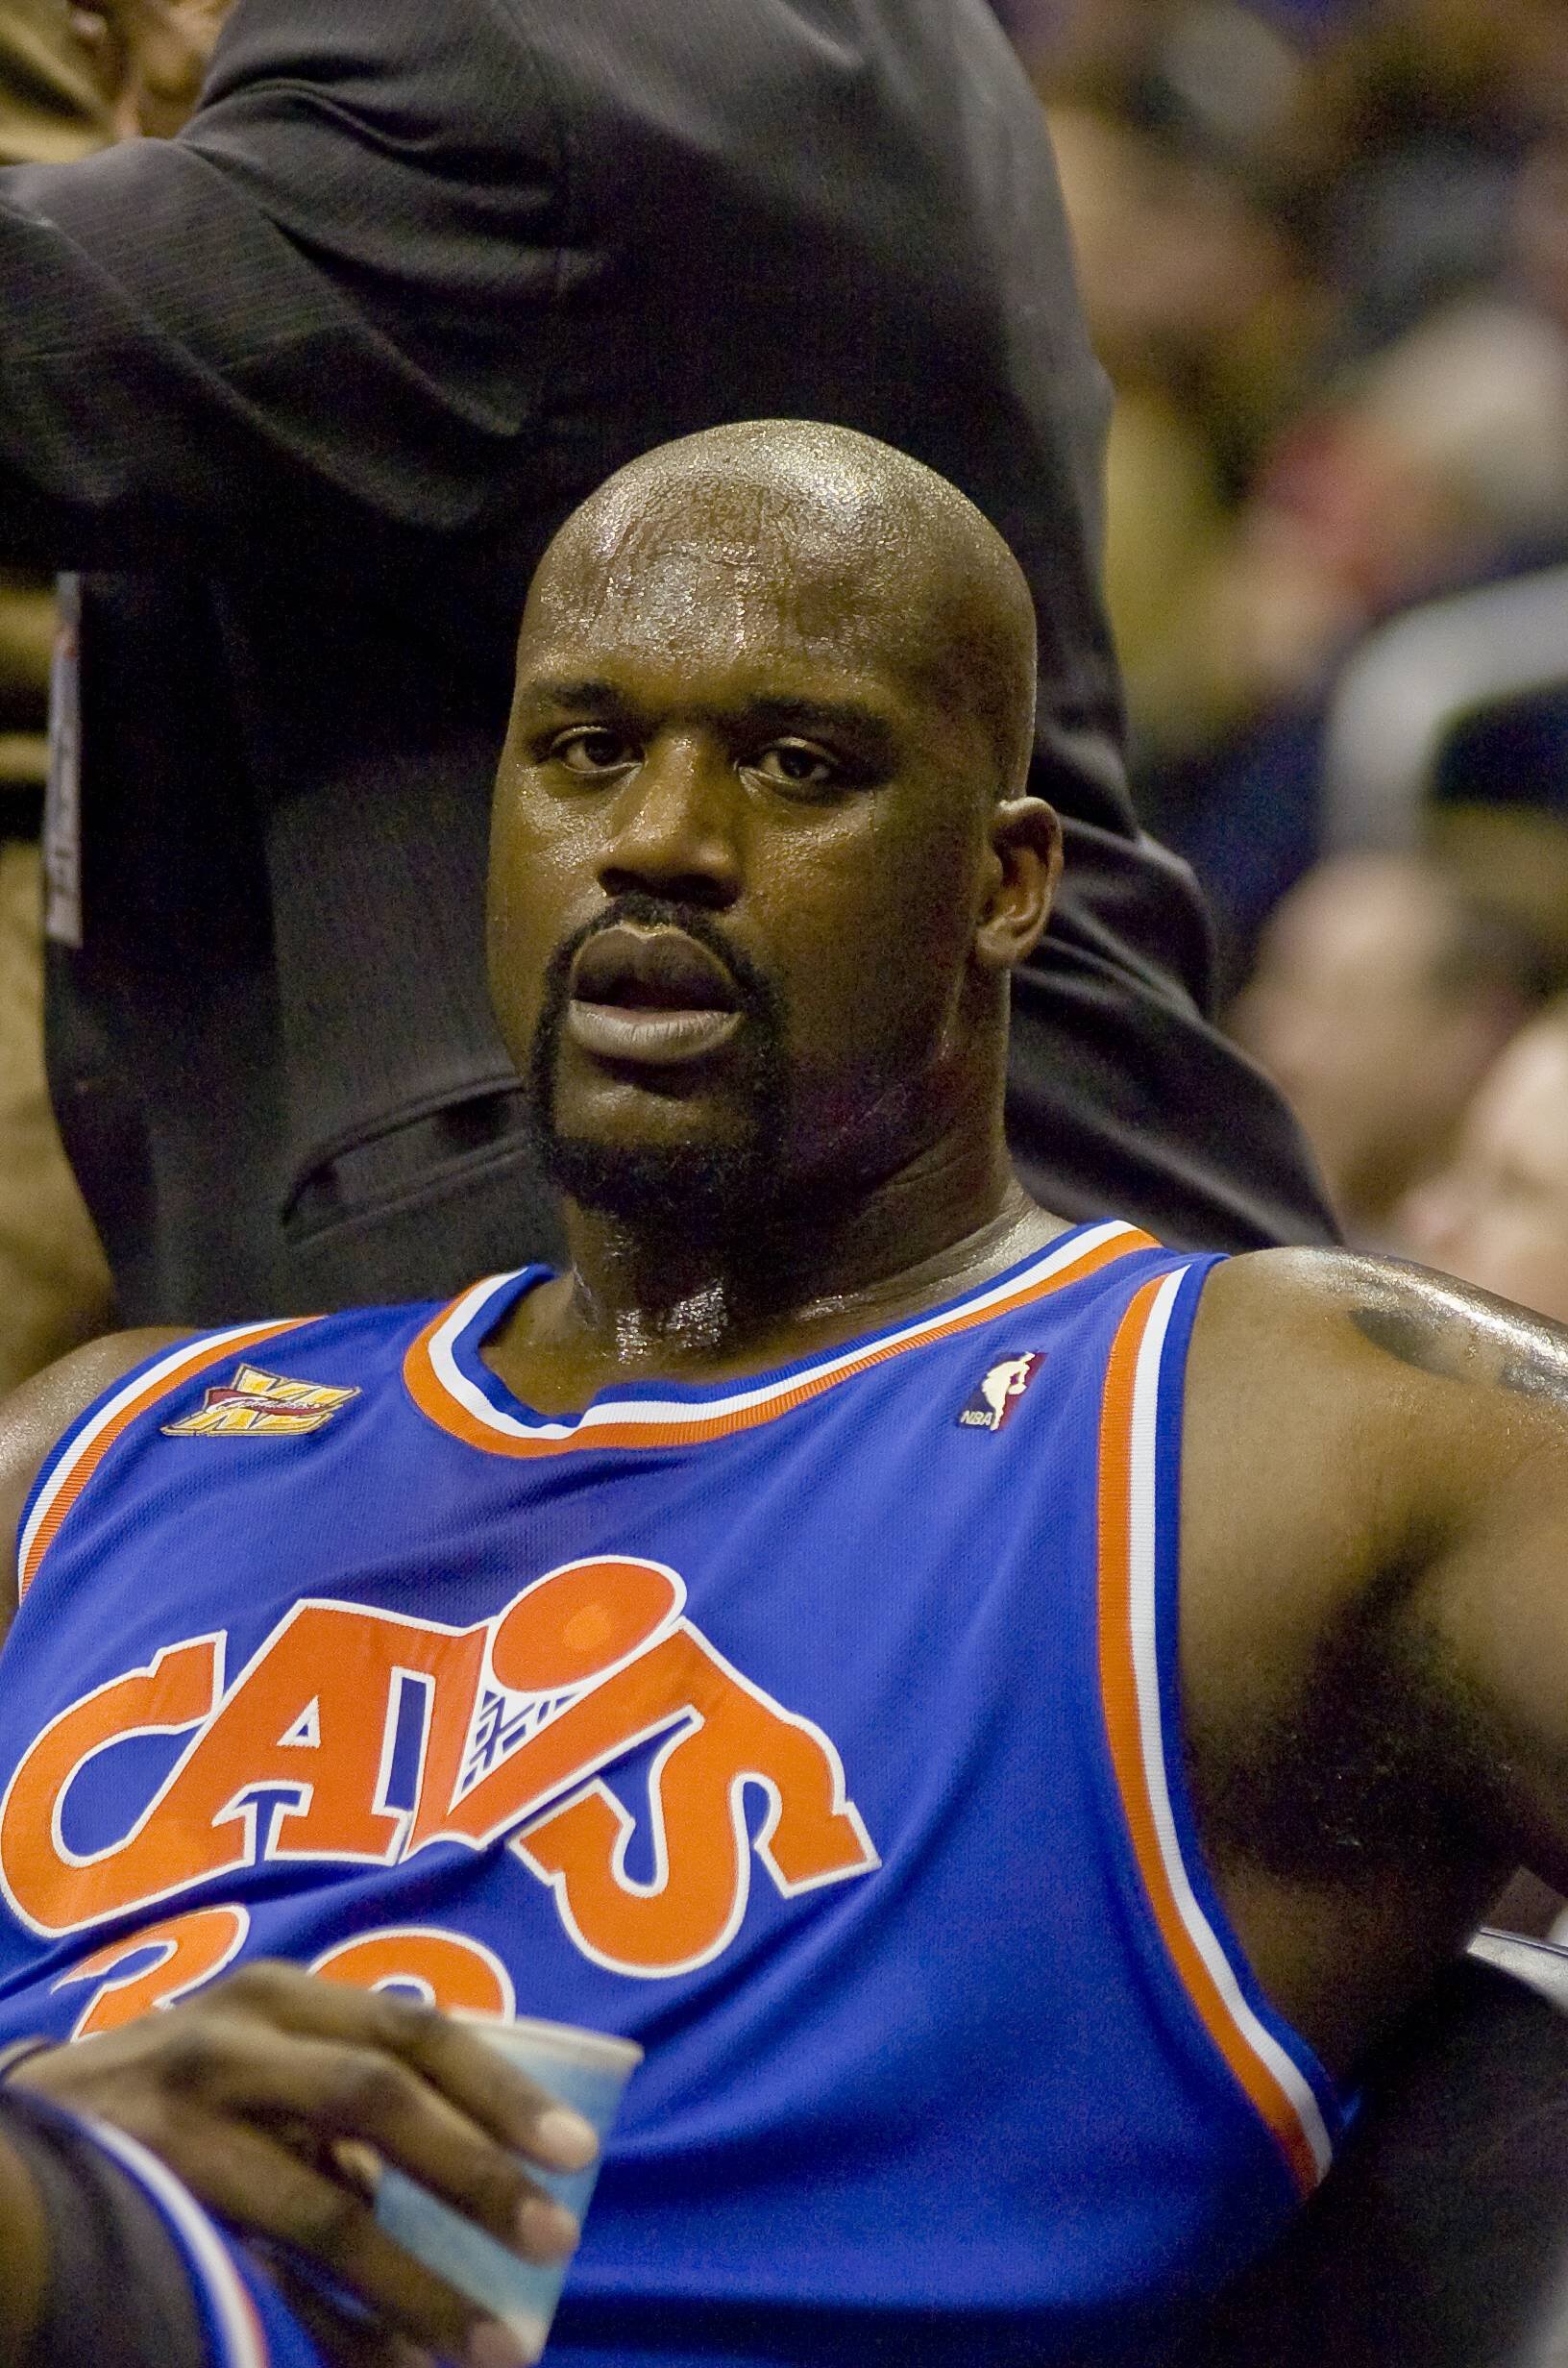 Pictures of Shaquille O'Neal - Pictures Of Celebrities